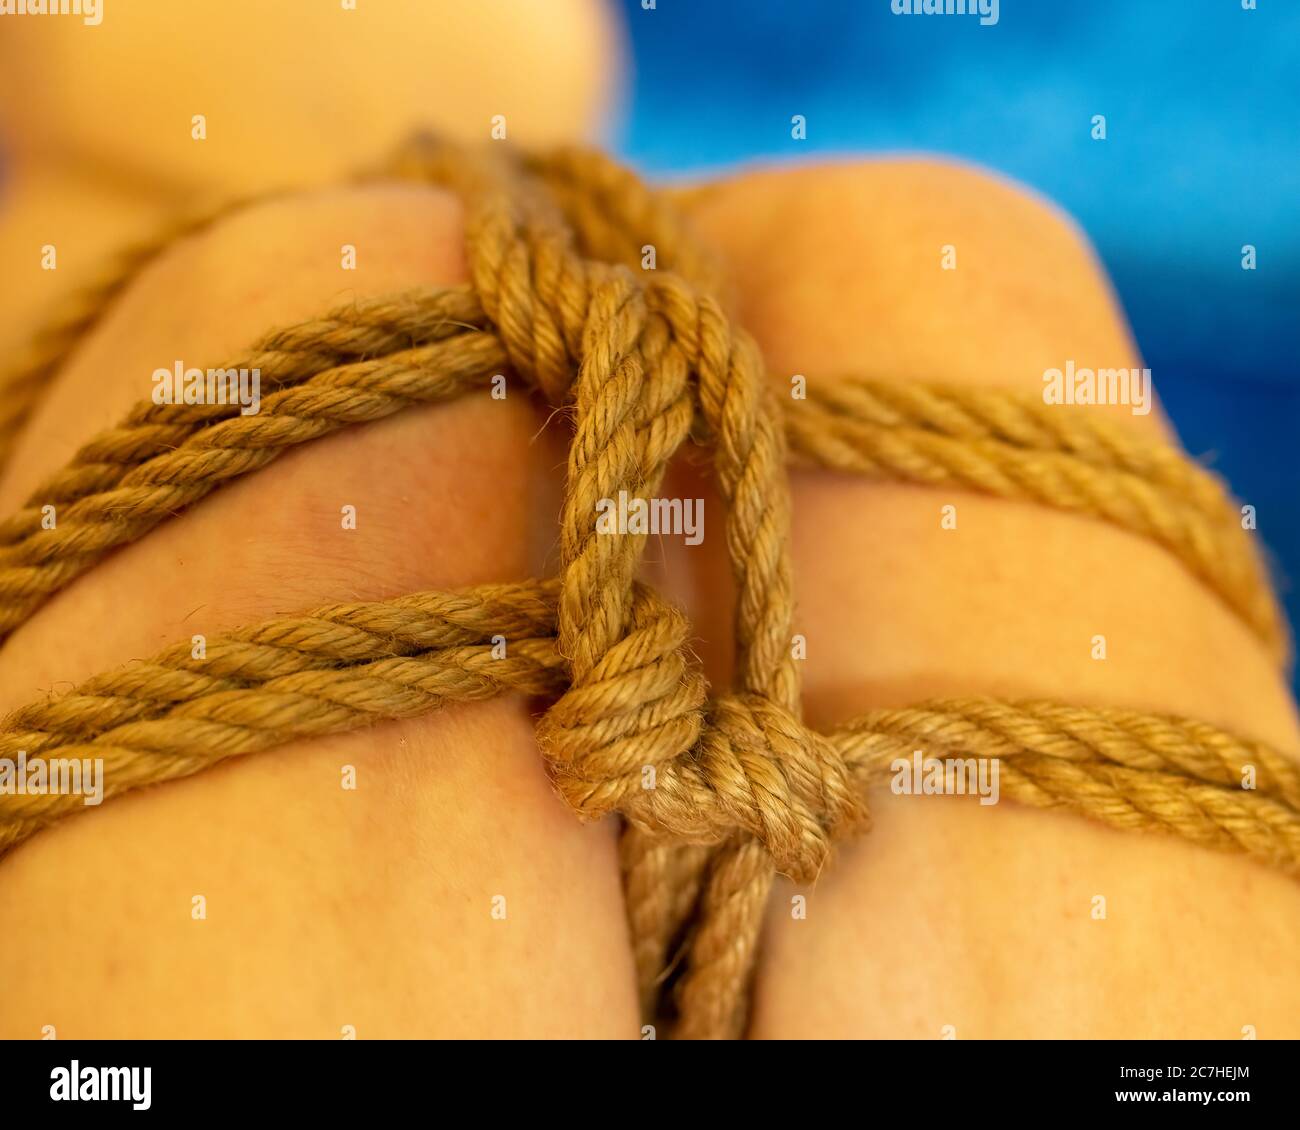 Selective focus on knot Anonymous young woman leg in mermaid futomomo tie with jute rope Stock Photo